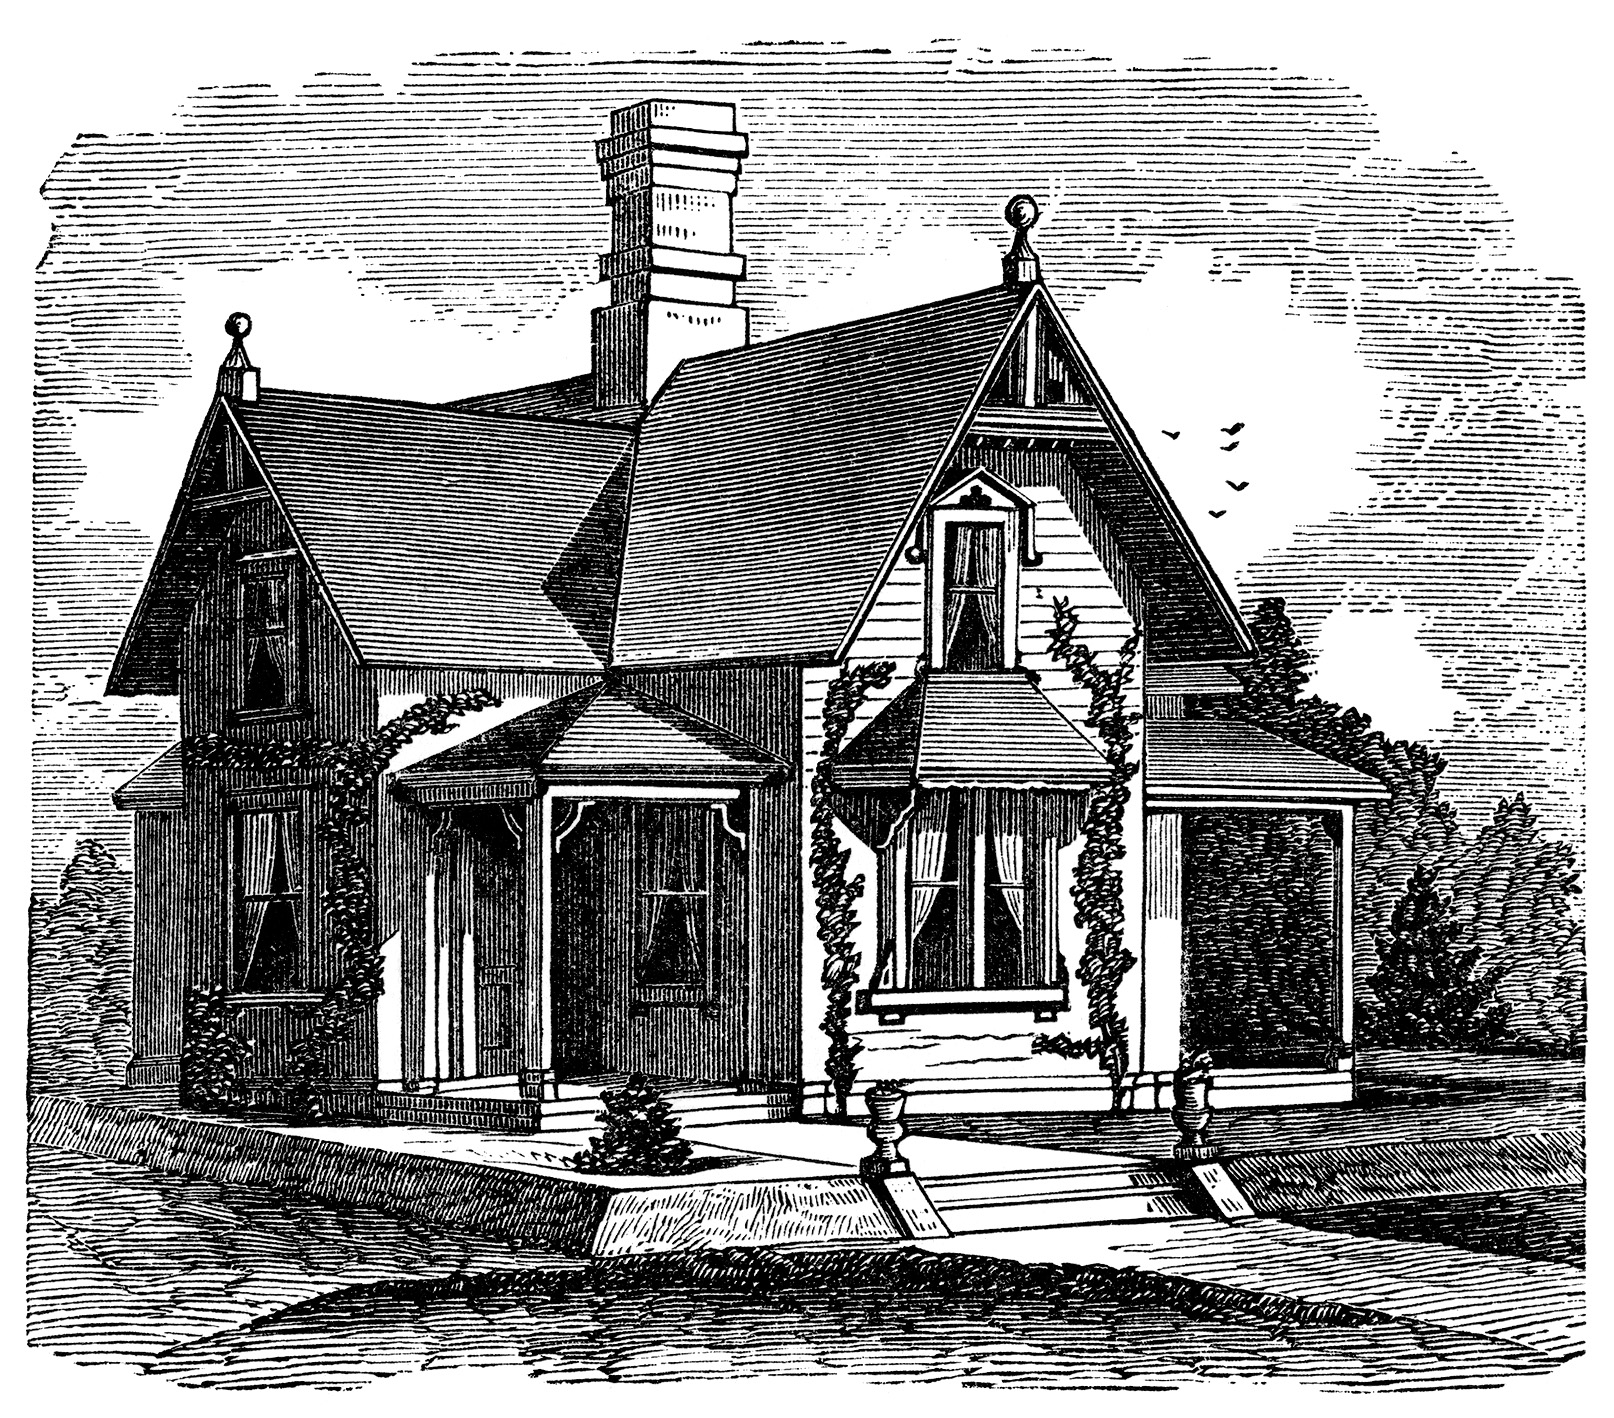 antique house illustration, black and white clipart, old fashioned cottage, Victorian house image, vintage home clip art